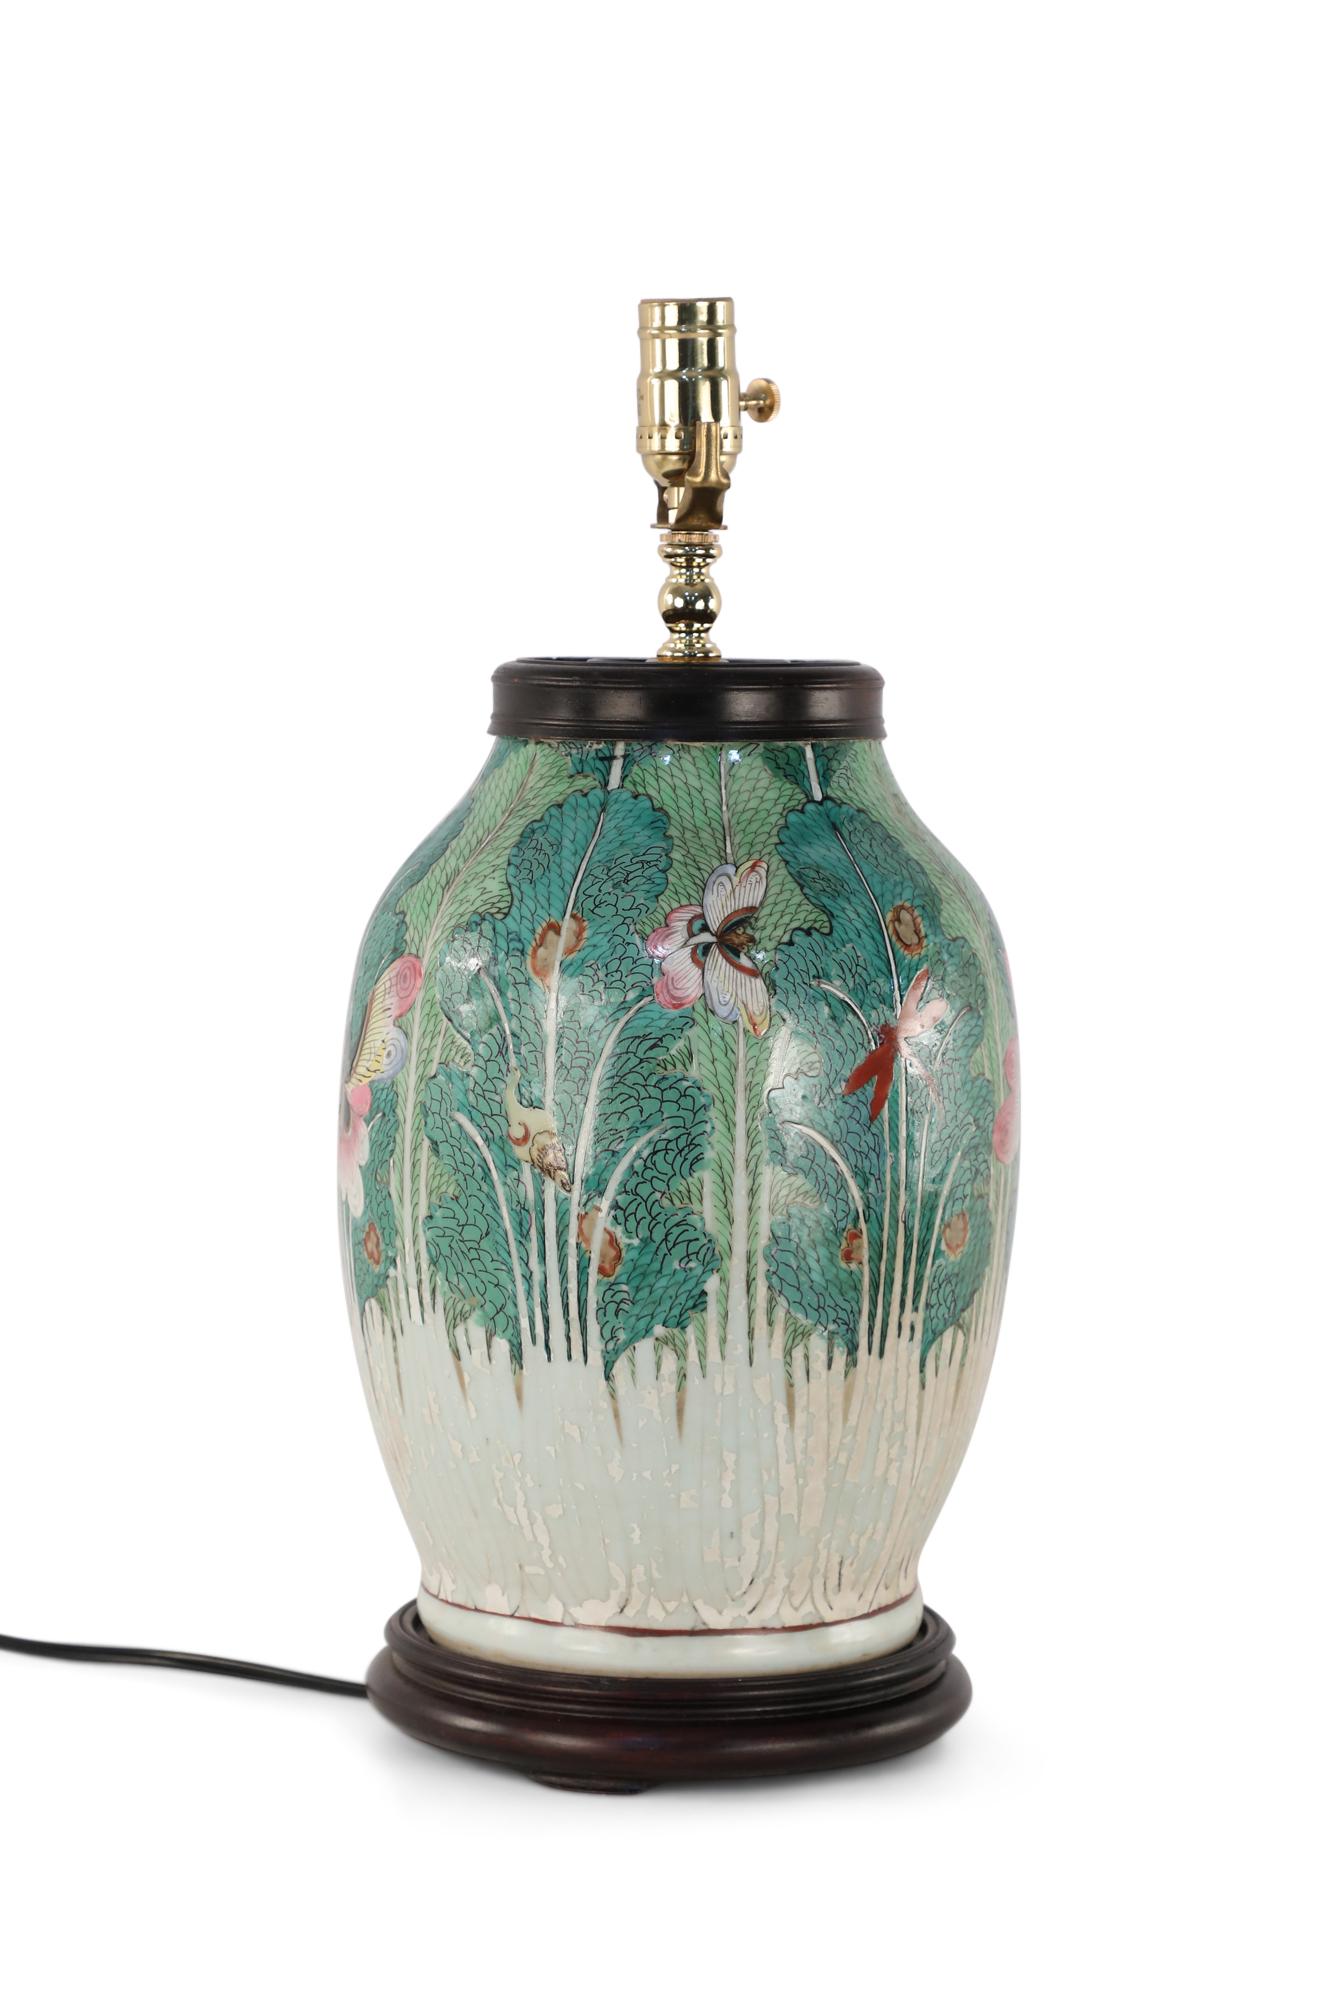 Early 20th century Chinese table lamp made from a vase painted with an intricate green motif of flora and dragon flies and a wooden base.